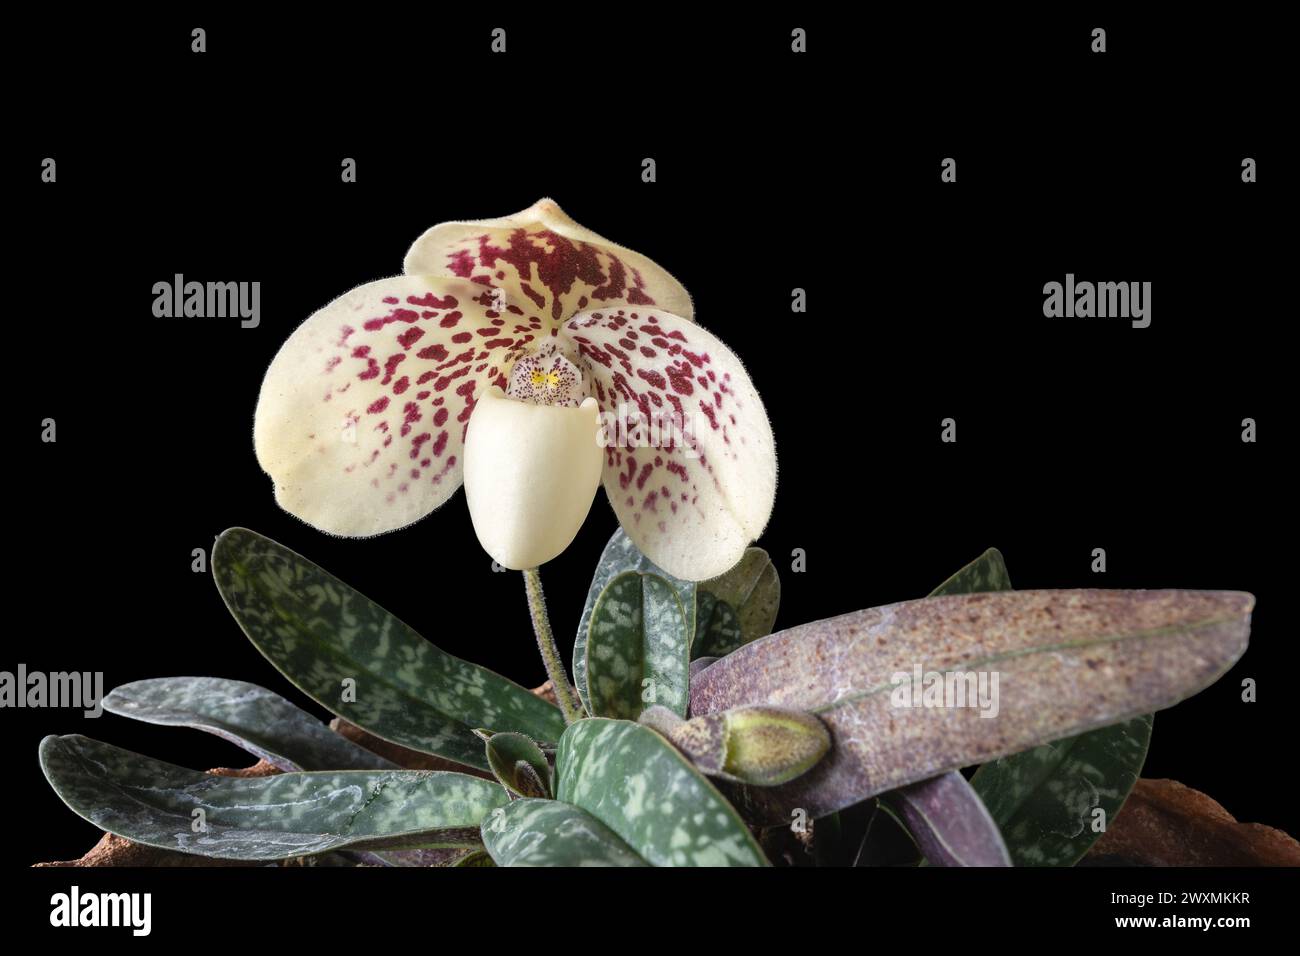 Closeup view of creamy white and purple red flower of lady slipper orchid species paphiopedilum godefroyae var leucochilum isolated black background Stock Photo